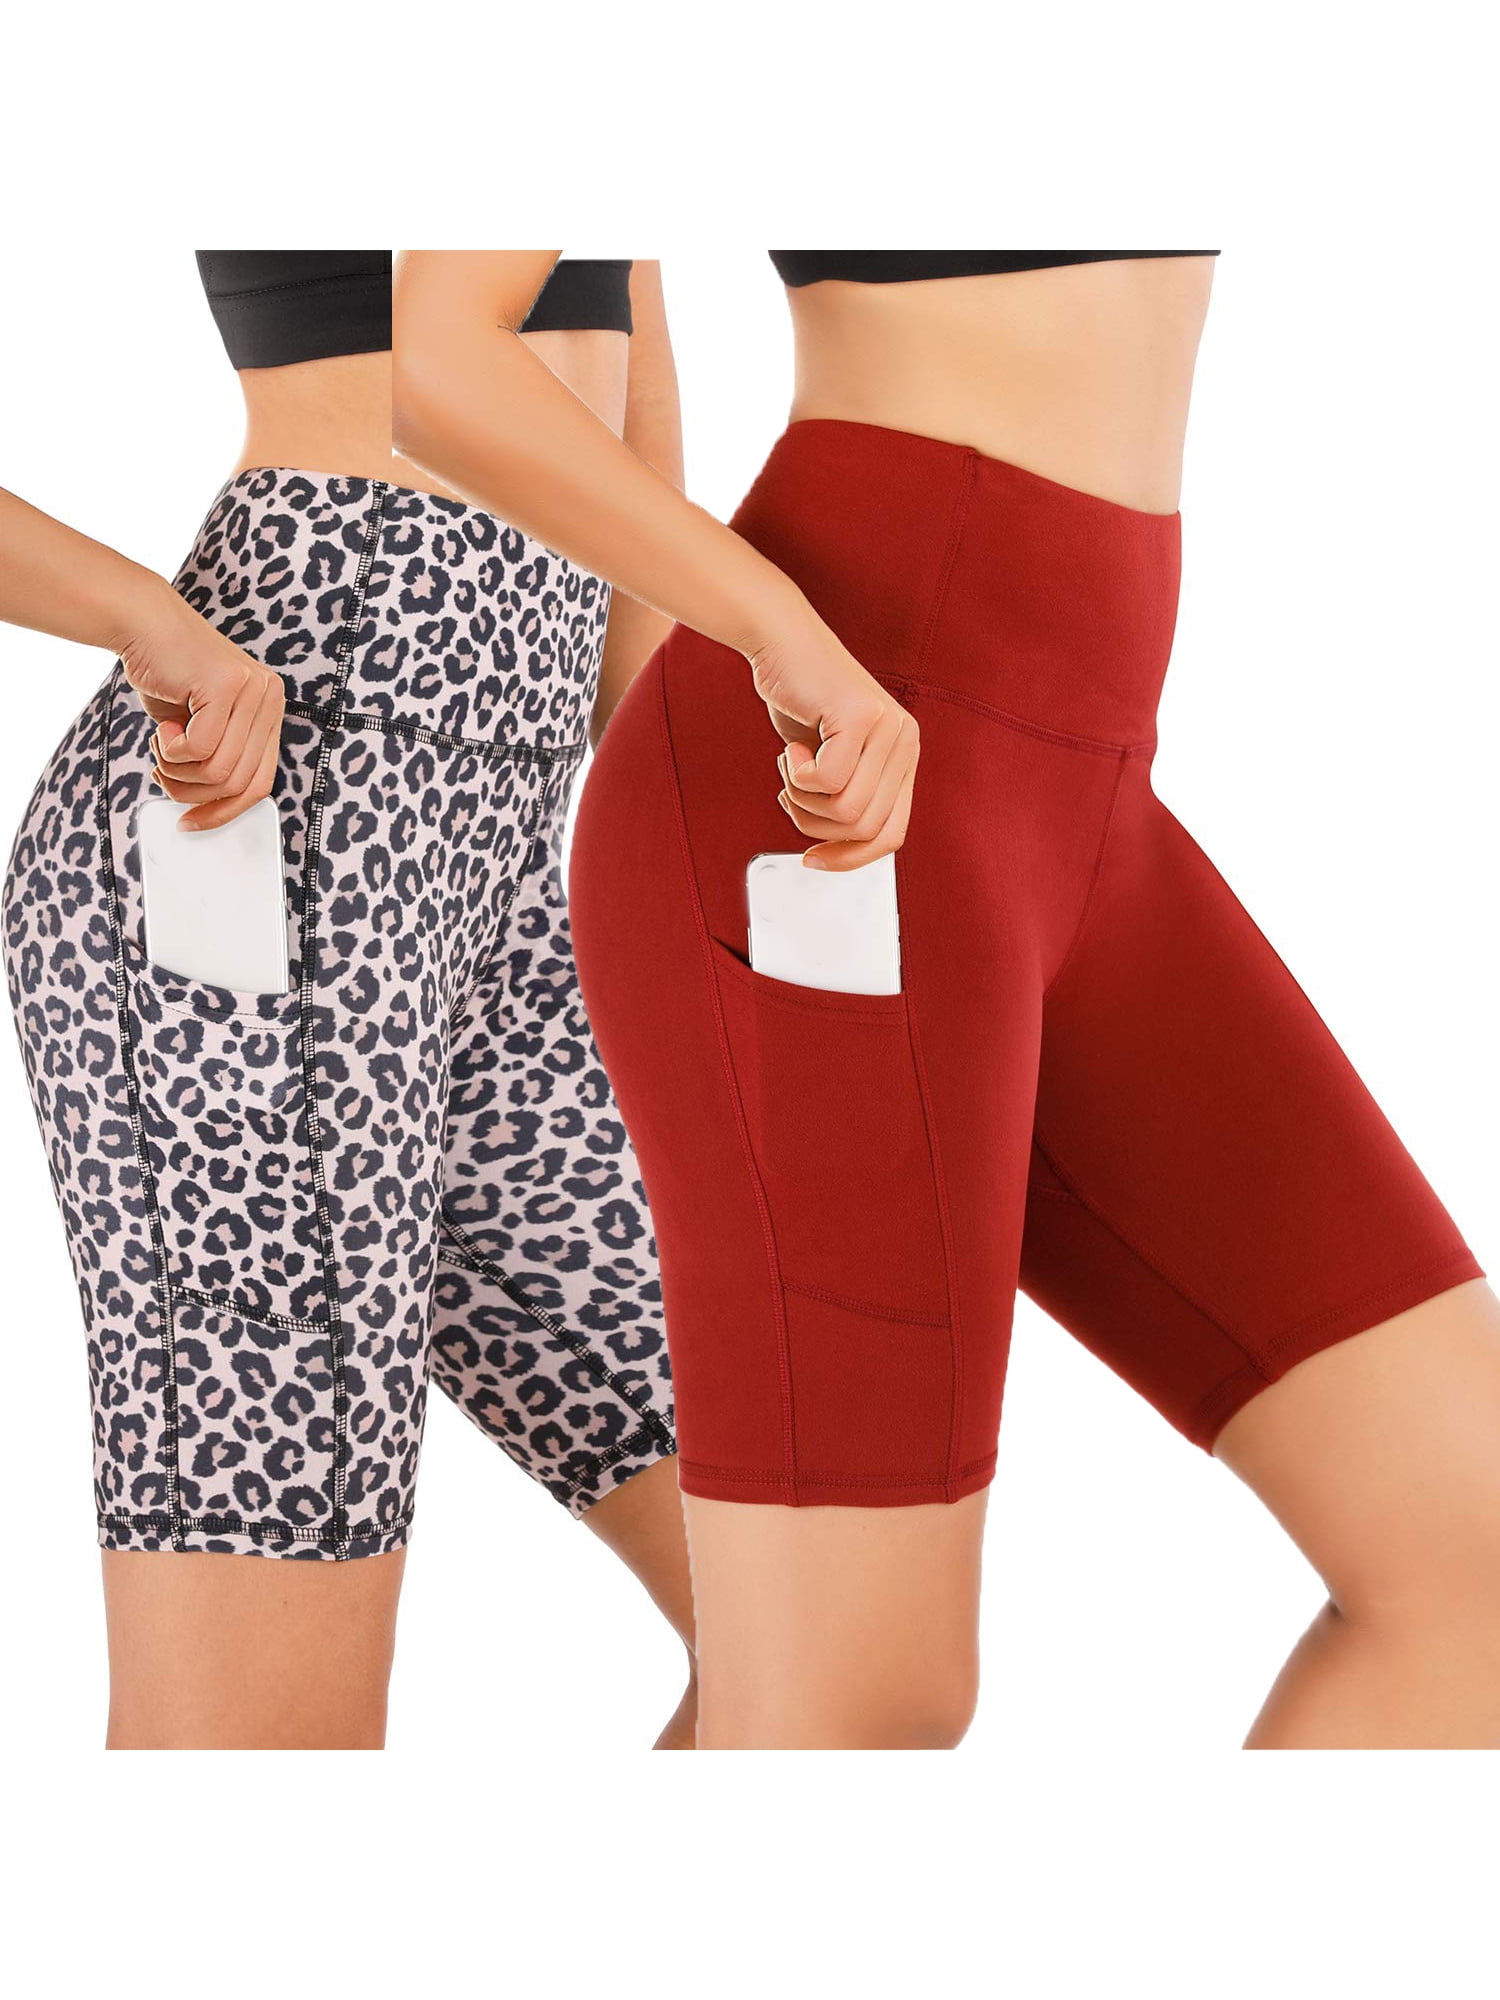 Women Hot Short Pants Pockets Gym Yoga Cycle Sports Fitness Stretch Trousers 